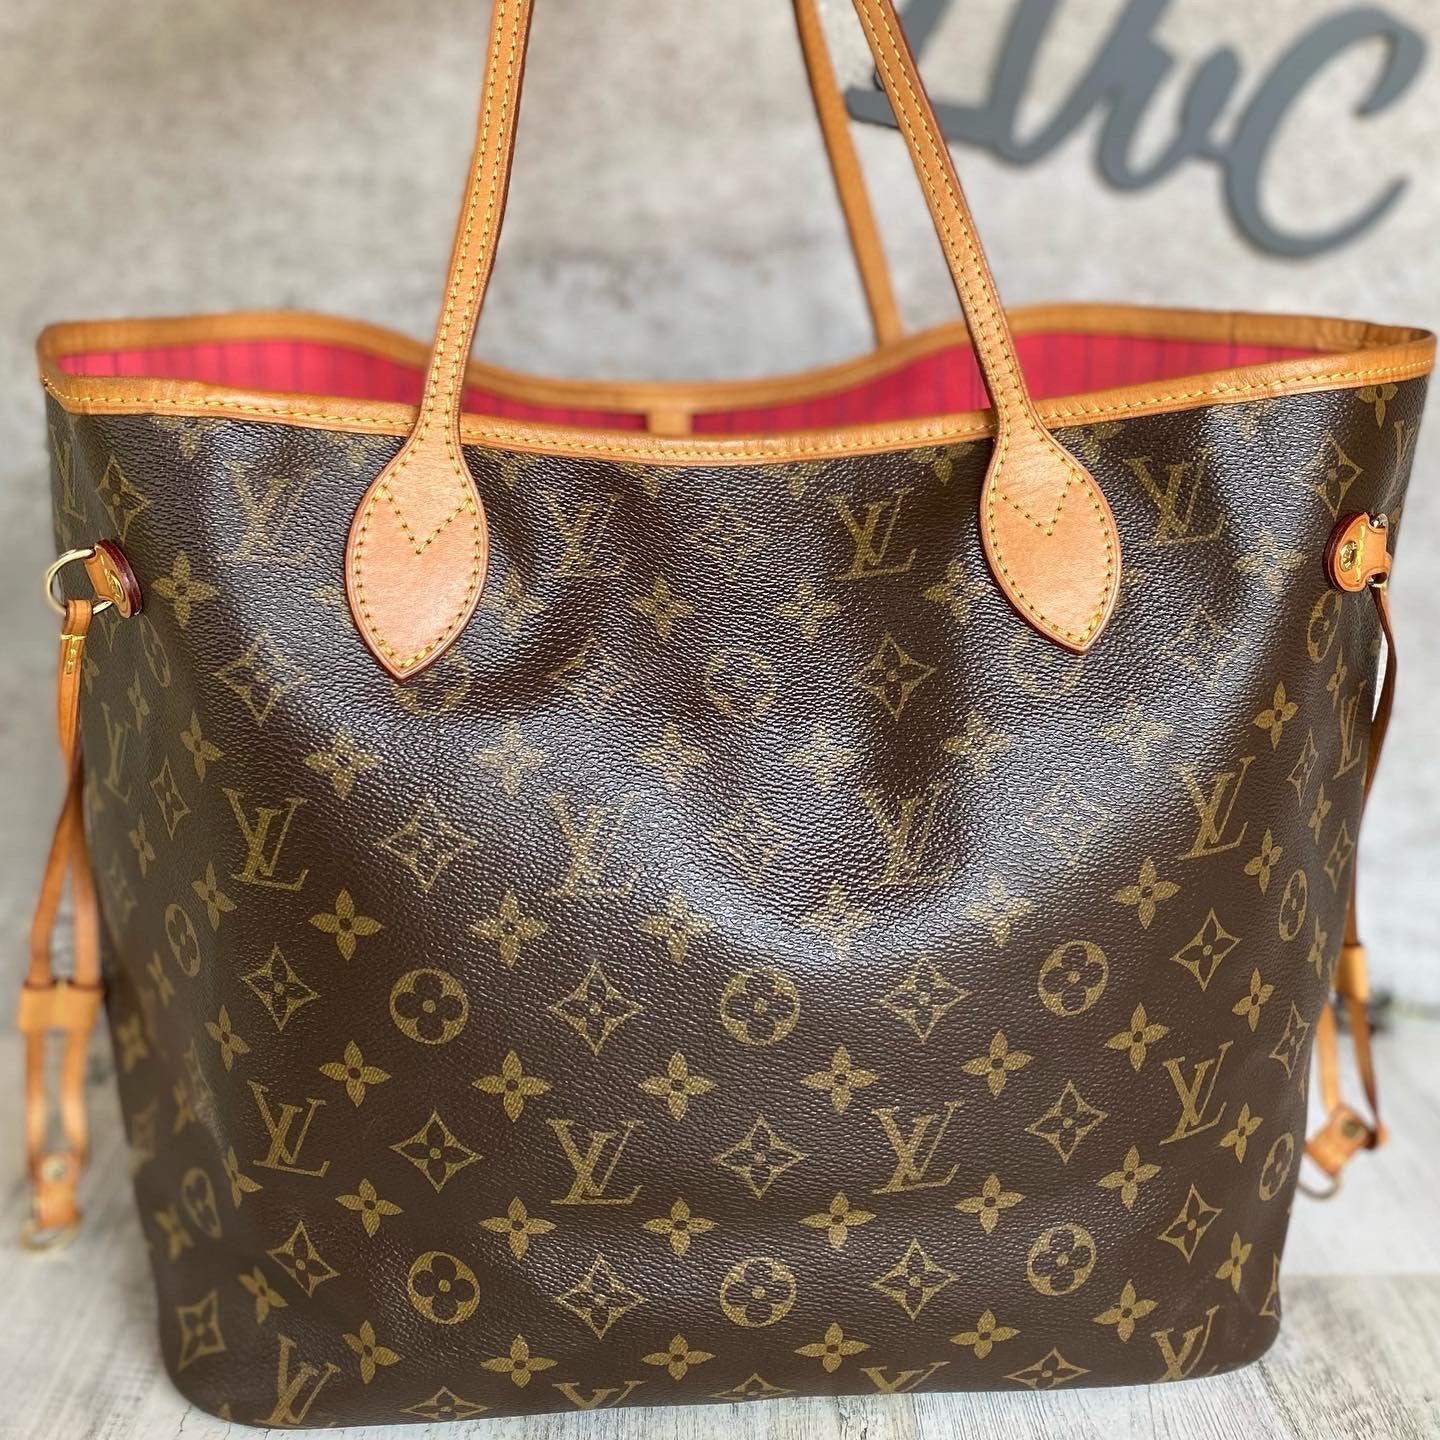 Preloved Louis Vuitton Damier Azur Neverfull MM Tote Bag with Pink